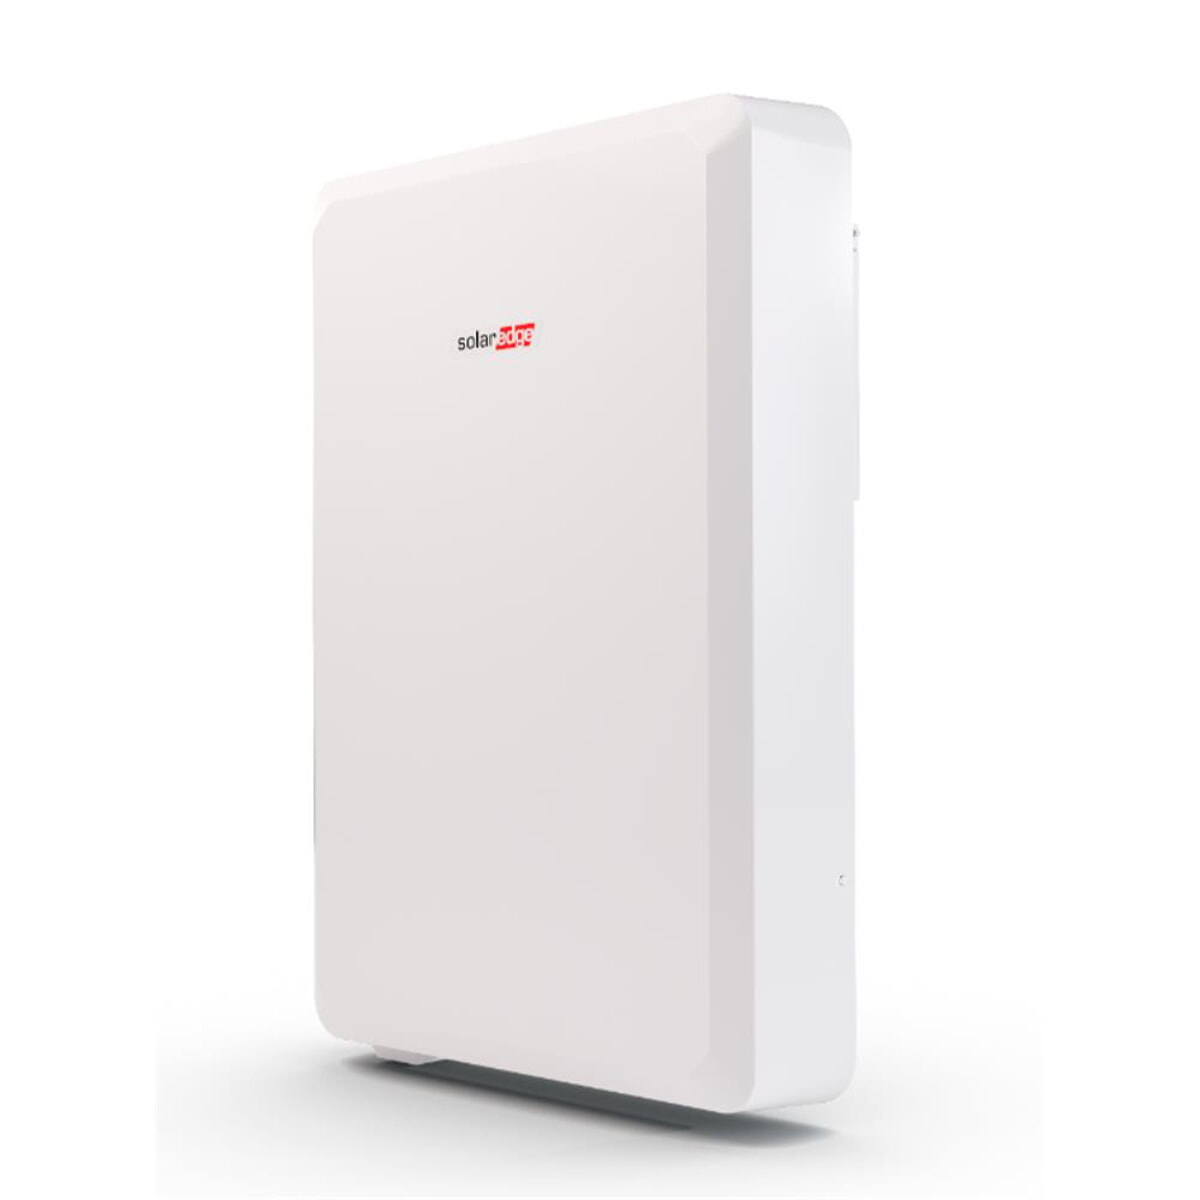 SolarEdge Home Battery 10 kWh (9.7 kWh net) battery storage system